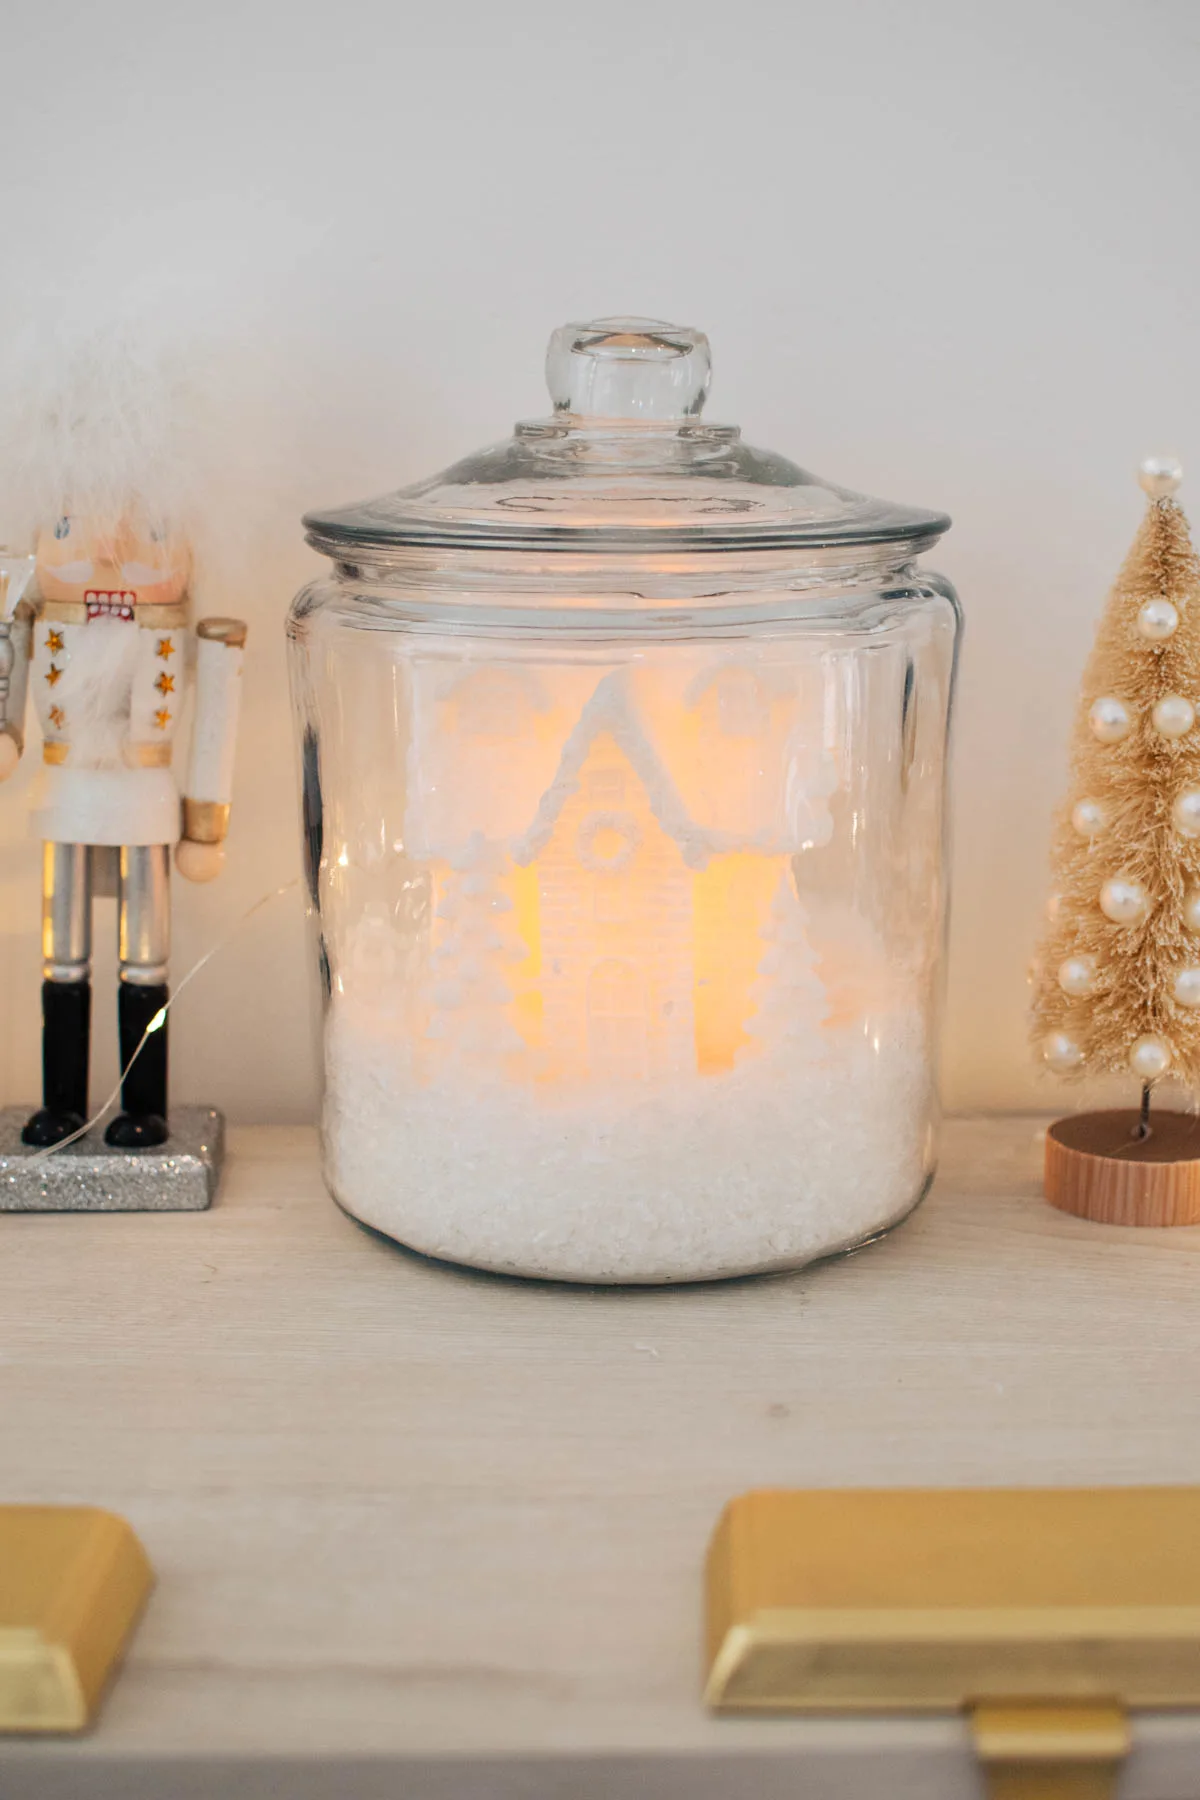 White Christmas house with light and fake snow in glass cookie jar on cream cabinet.